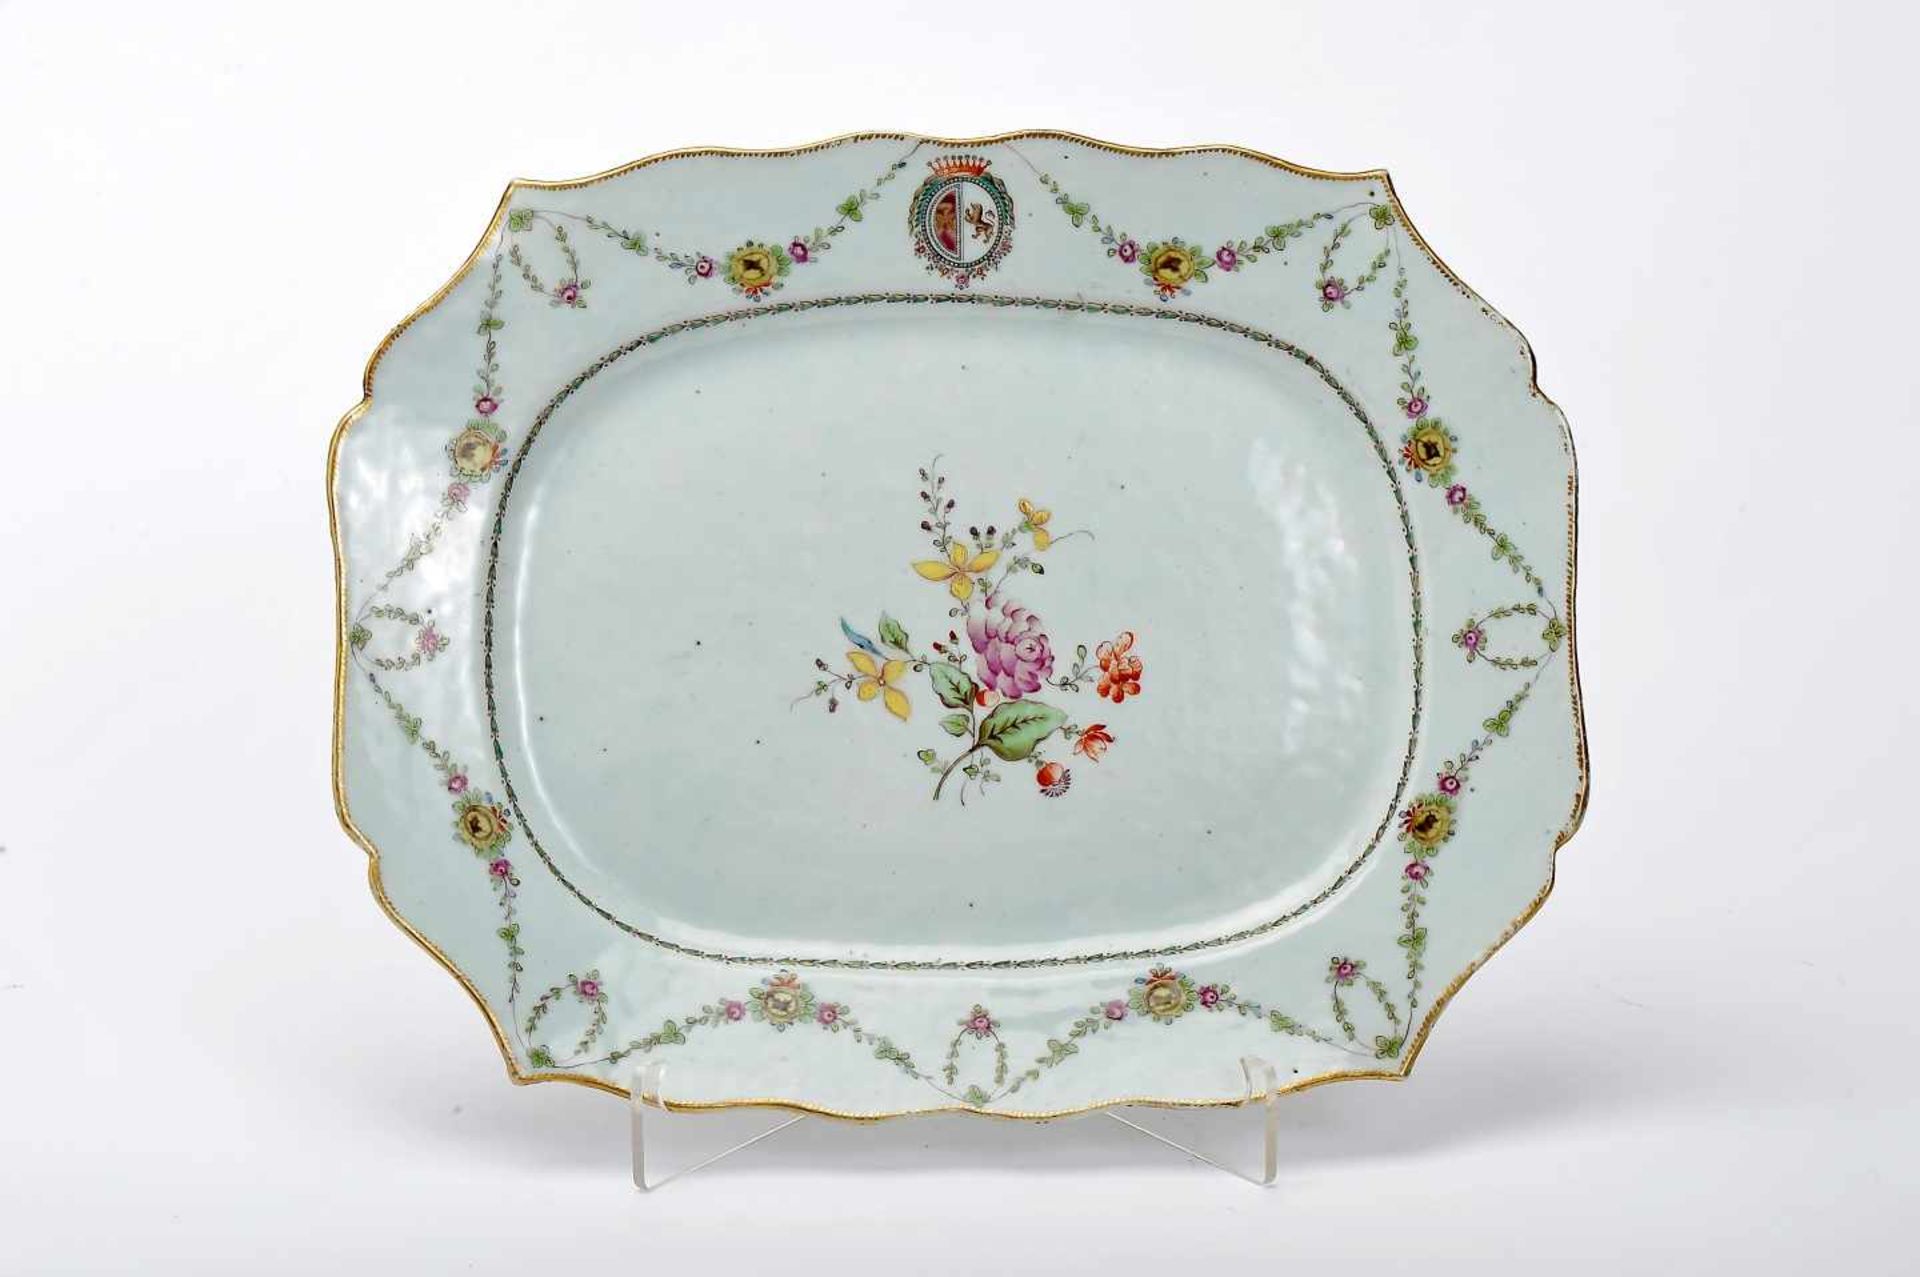 A Scalloped PlatterA Scalloped Platter, Chinese export porcelain, pierced, polychrome and gilt